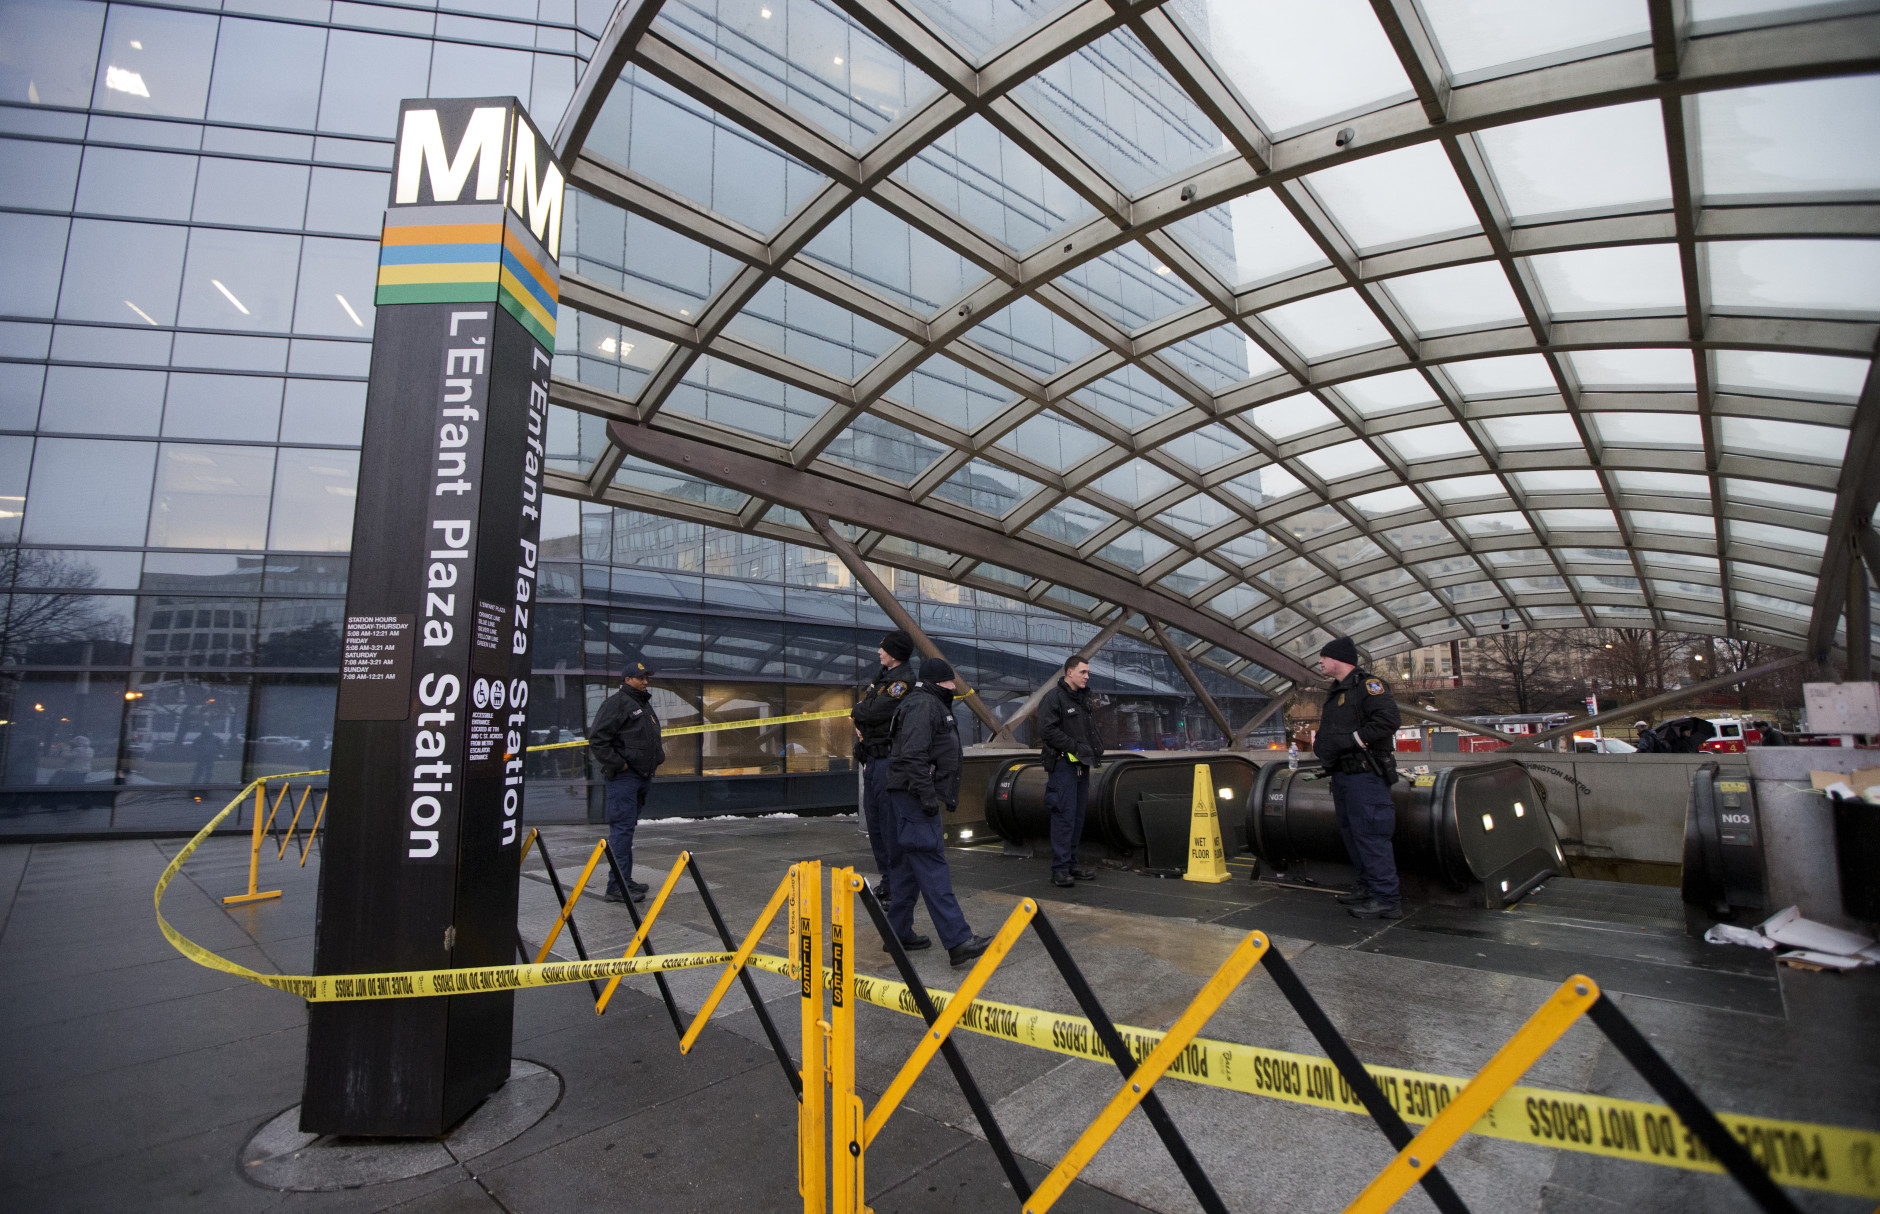 Metro Transit Police officers, secure the entrance to LEnfant Plaza Station in Washington, Monday, Jan. 12, 2015. Metro officials say one of the busiest stations in downtown Washington has been evacuated because of smoke. (AP Photo/Manuel Balce Ceneta)